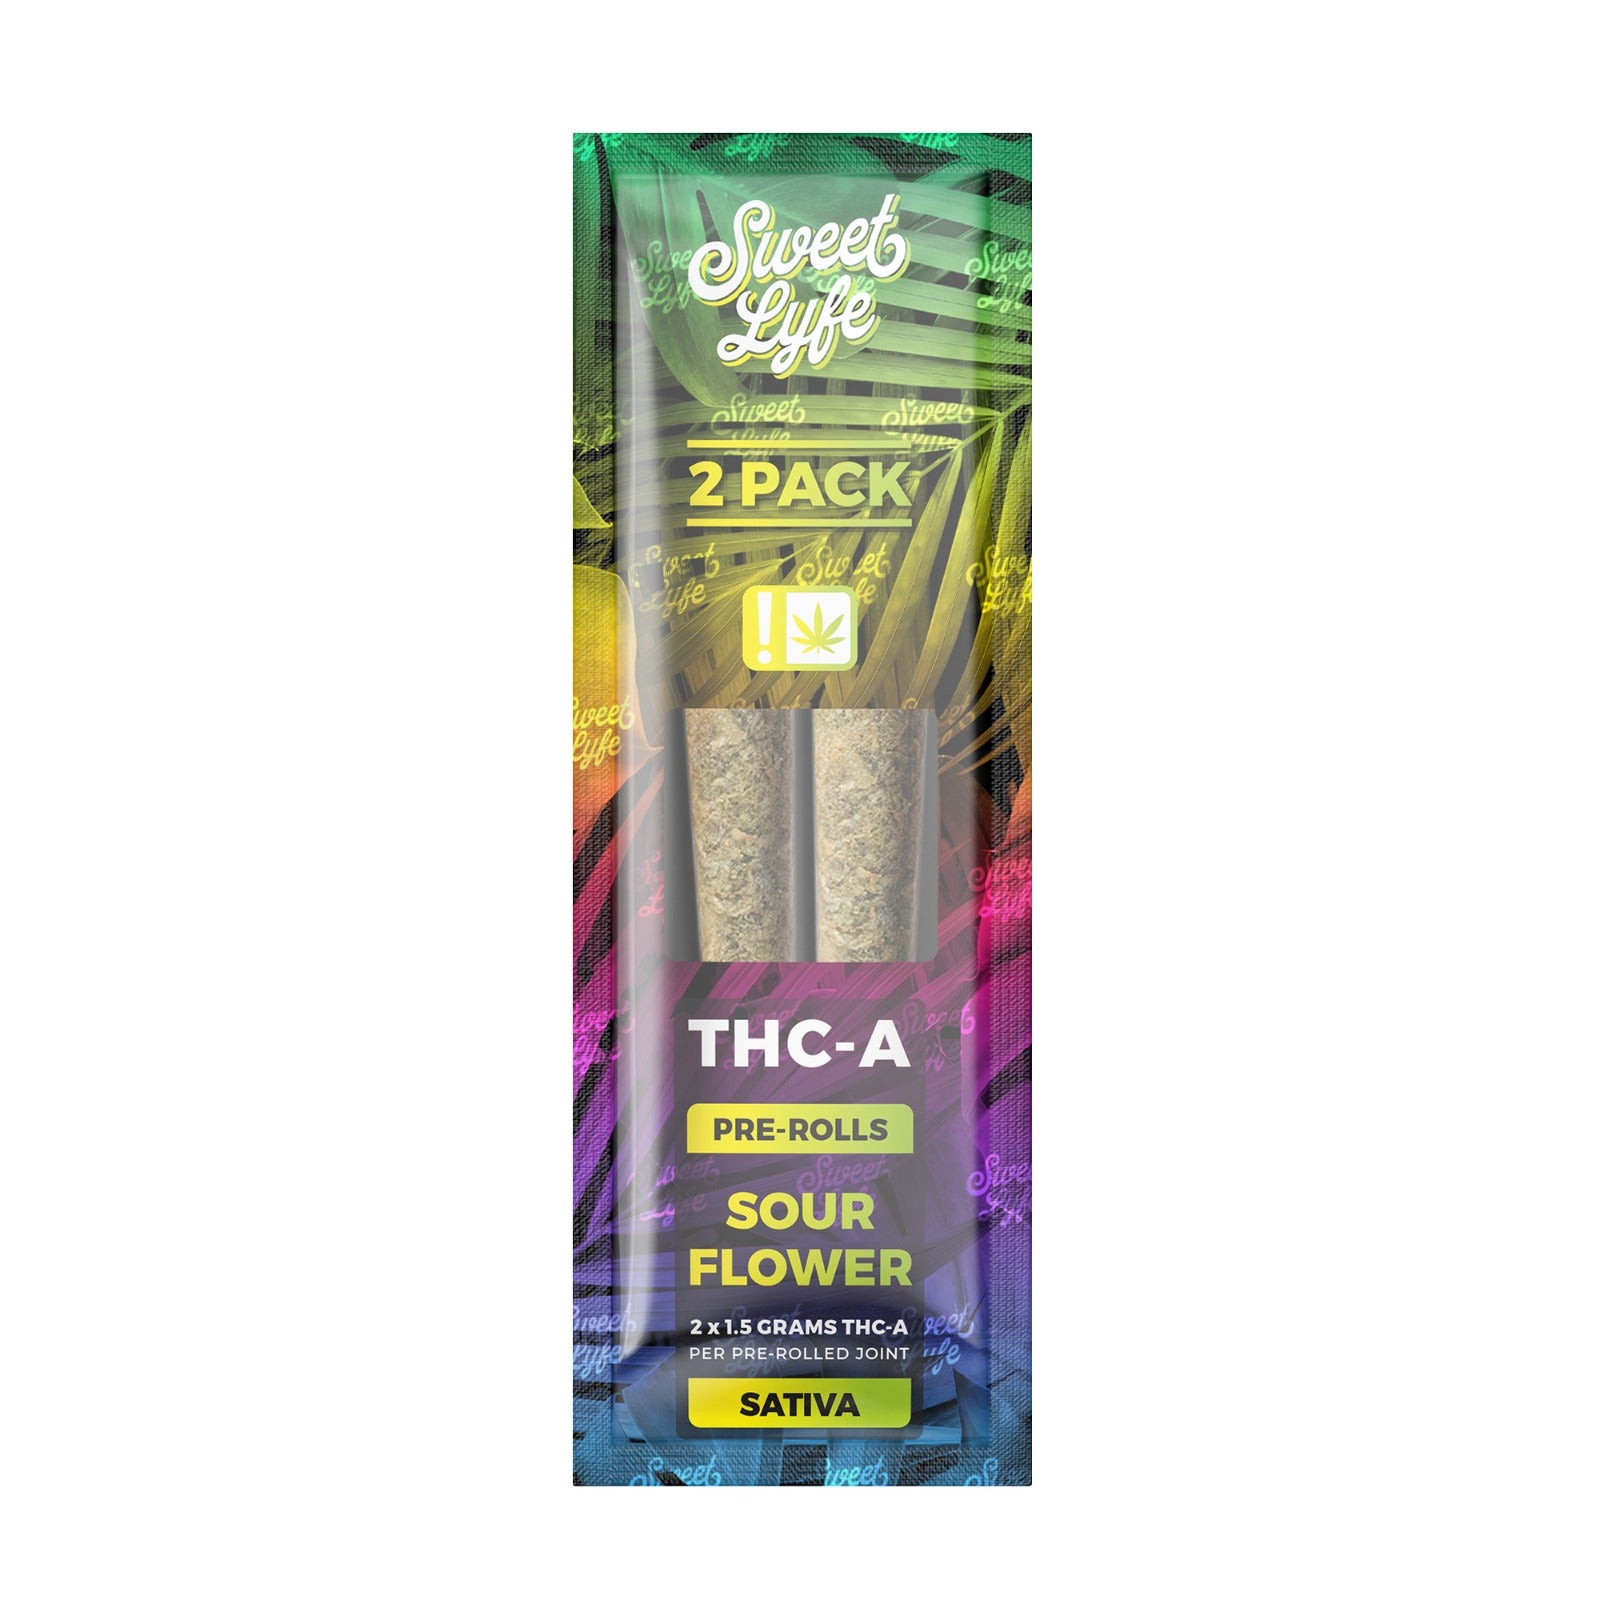 2 Pack Pre-Rolls Joint THC-A|Sour Flower - Sativa